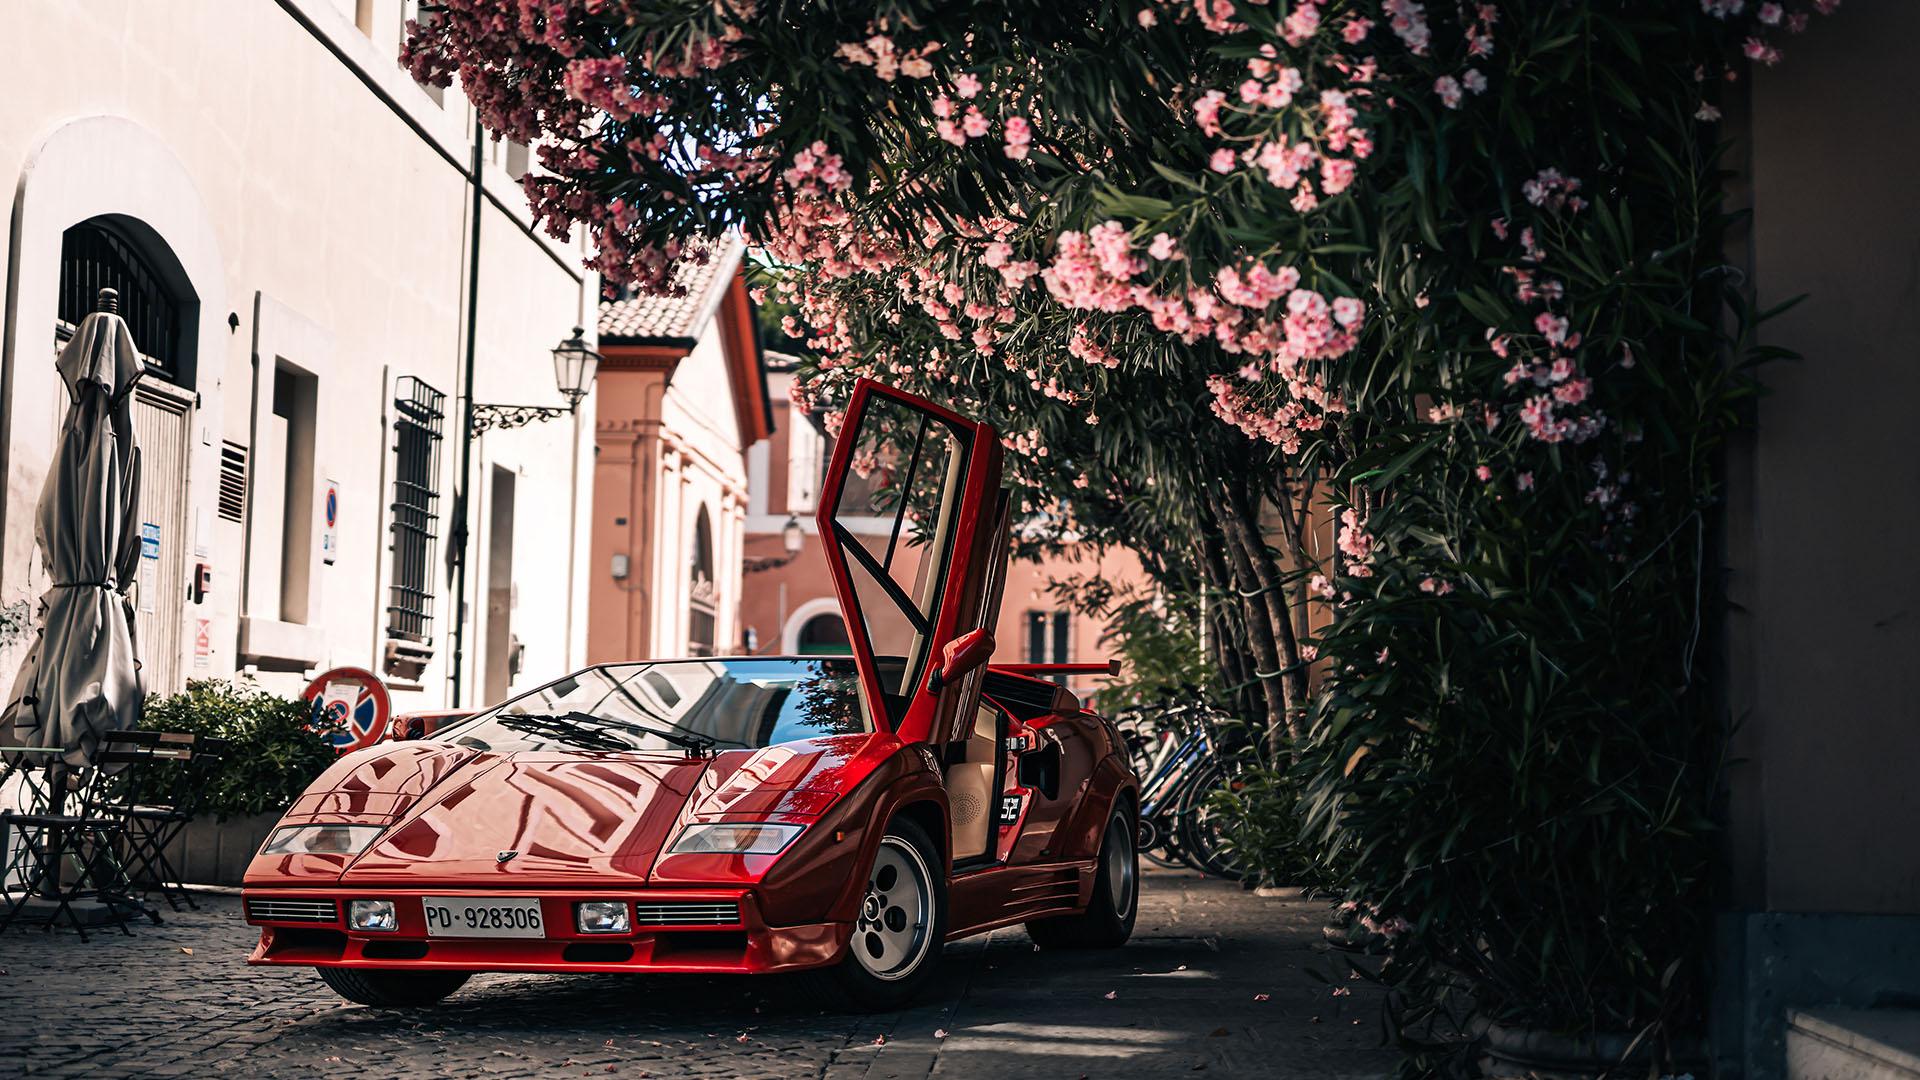 Countach and lm002 v12 12